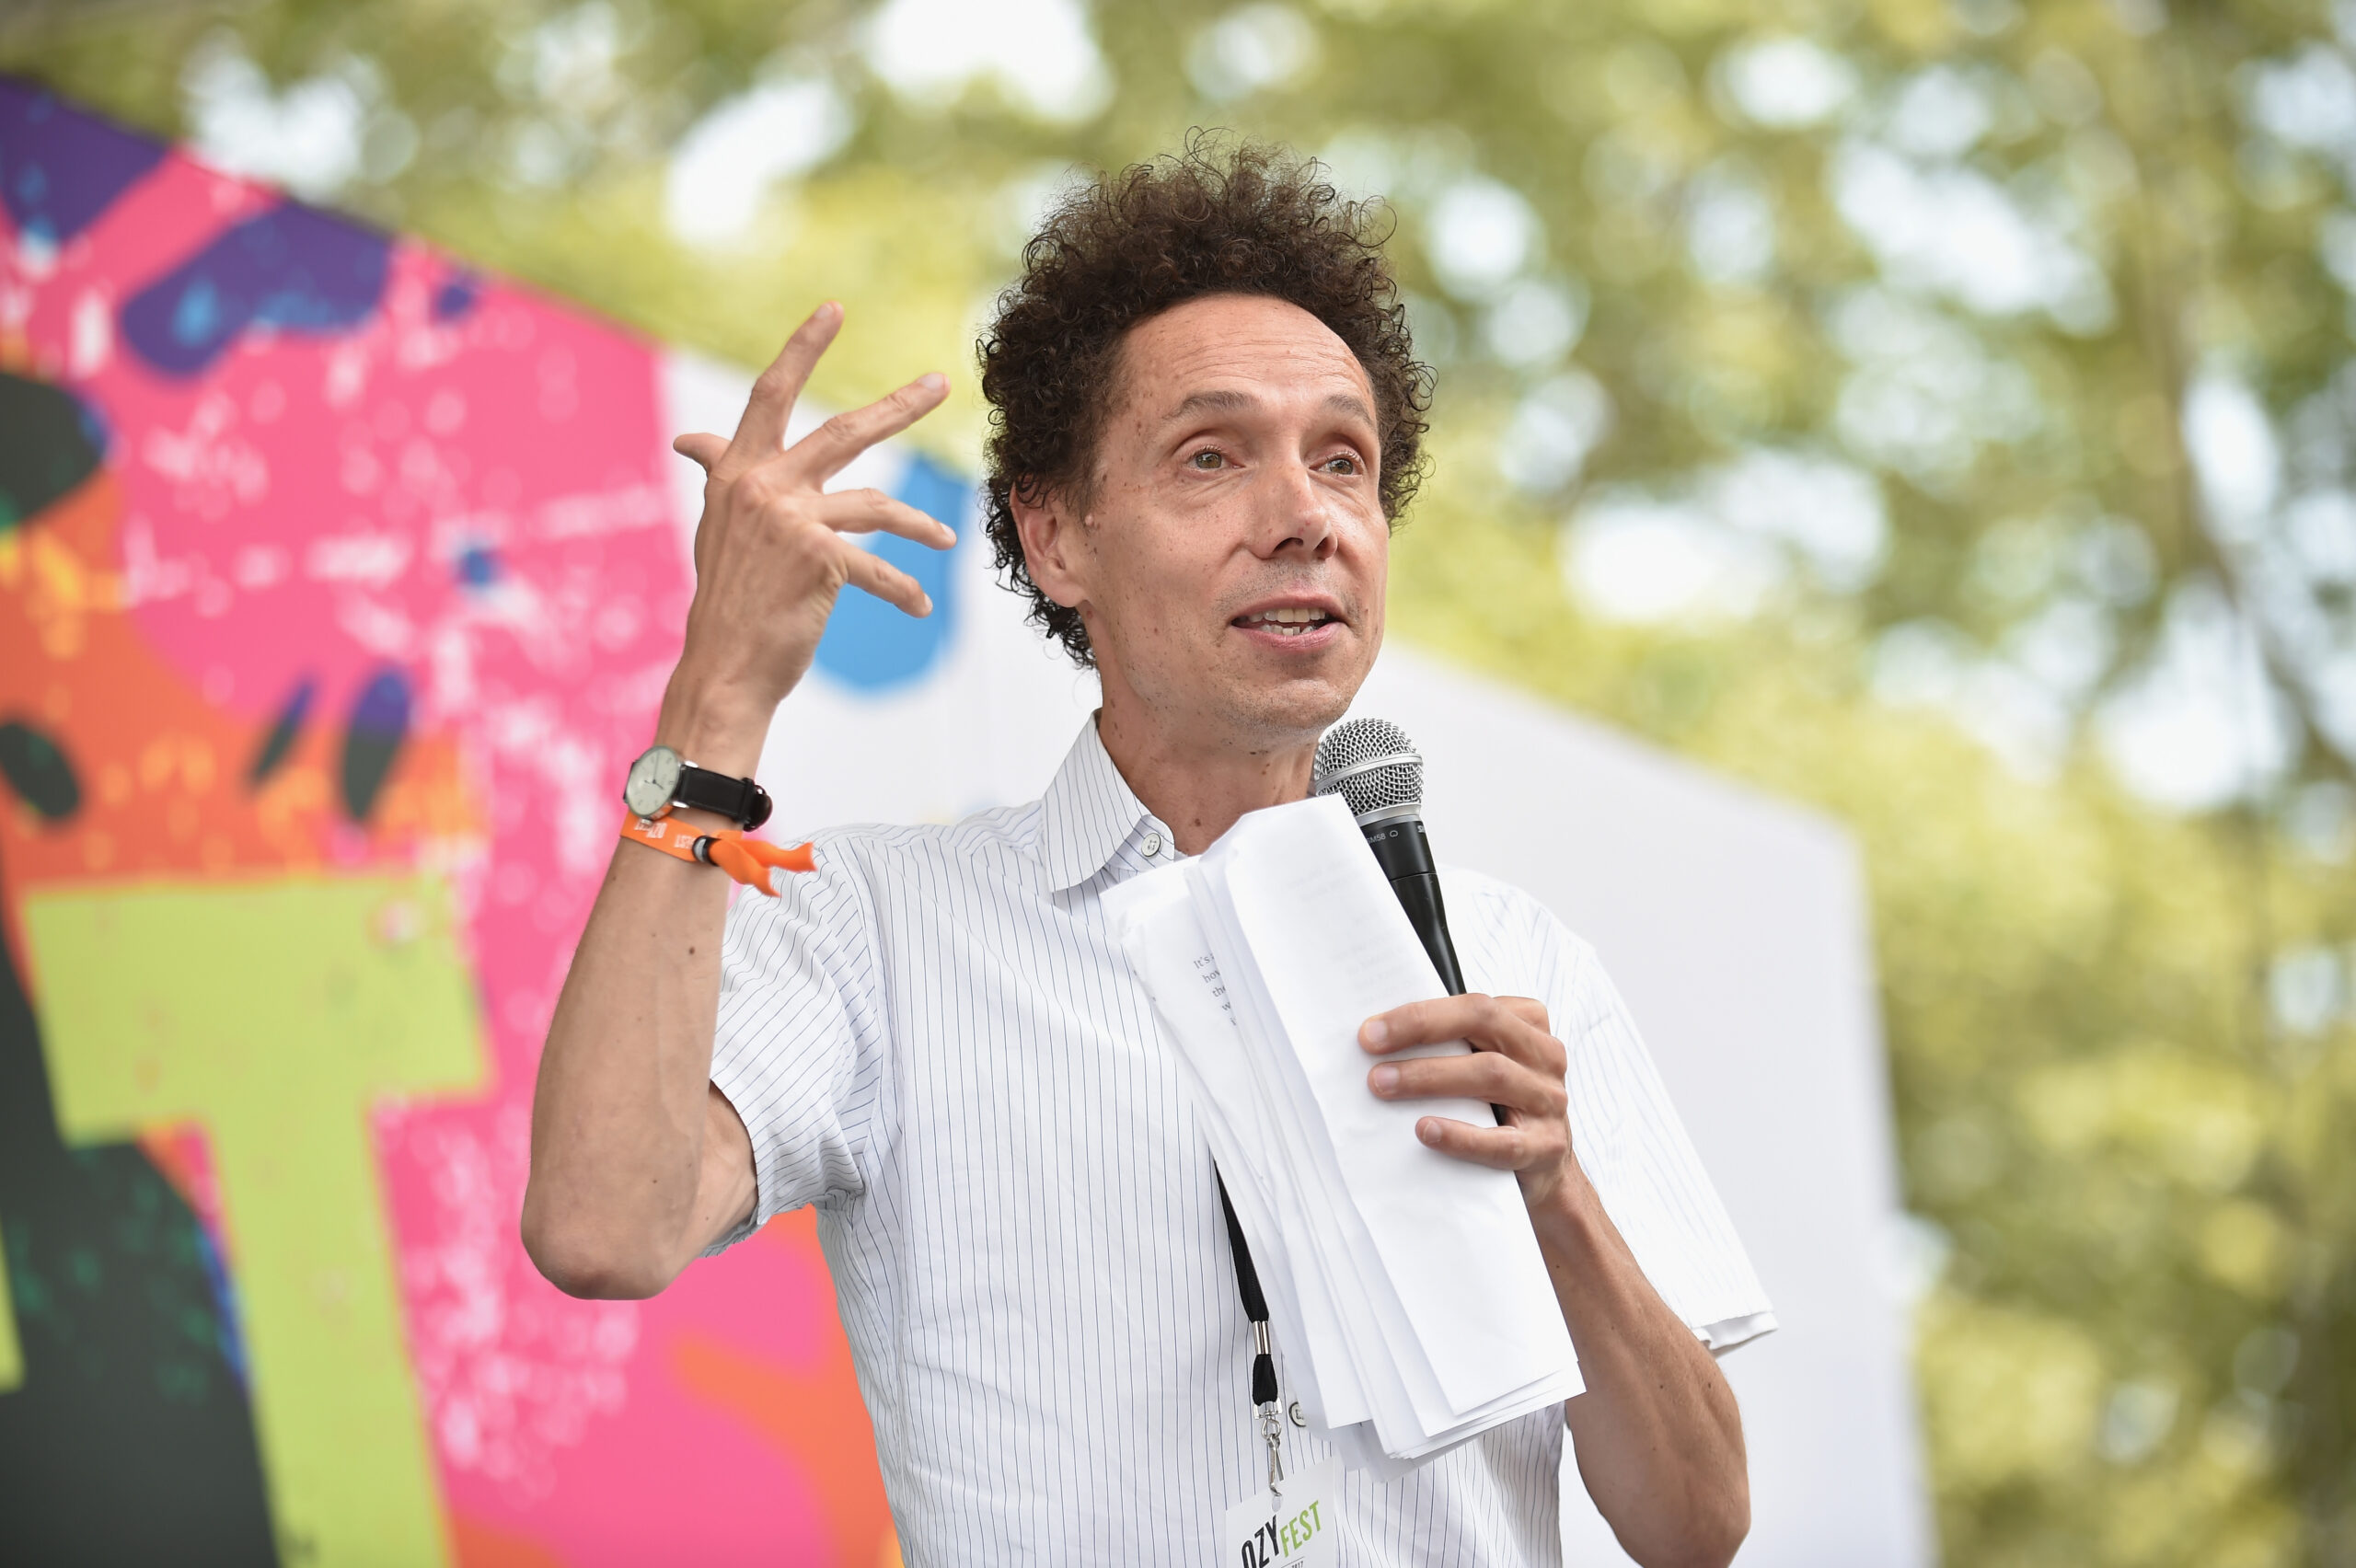 Malcolm Gladwell Railed Against Working From Home and People Are Not Happy About It: ‘Imagine Reducing Your Life to a Job’